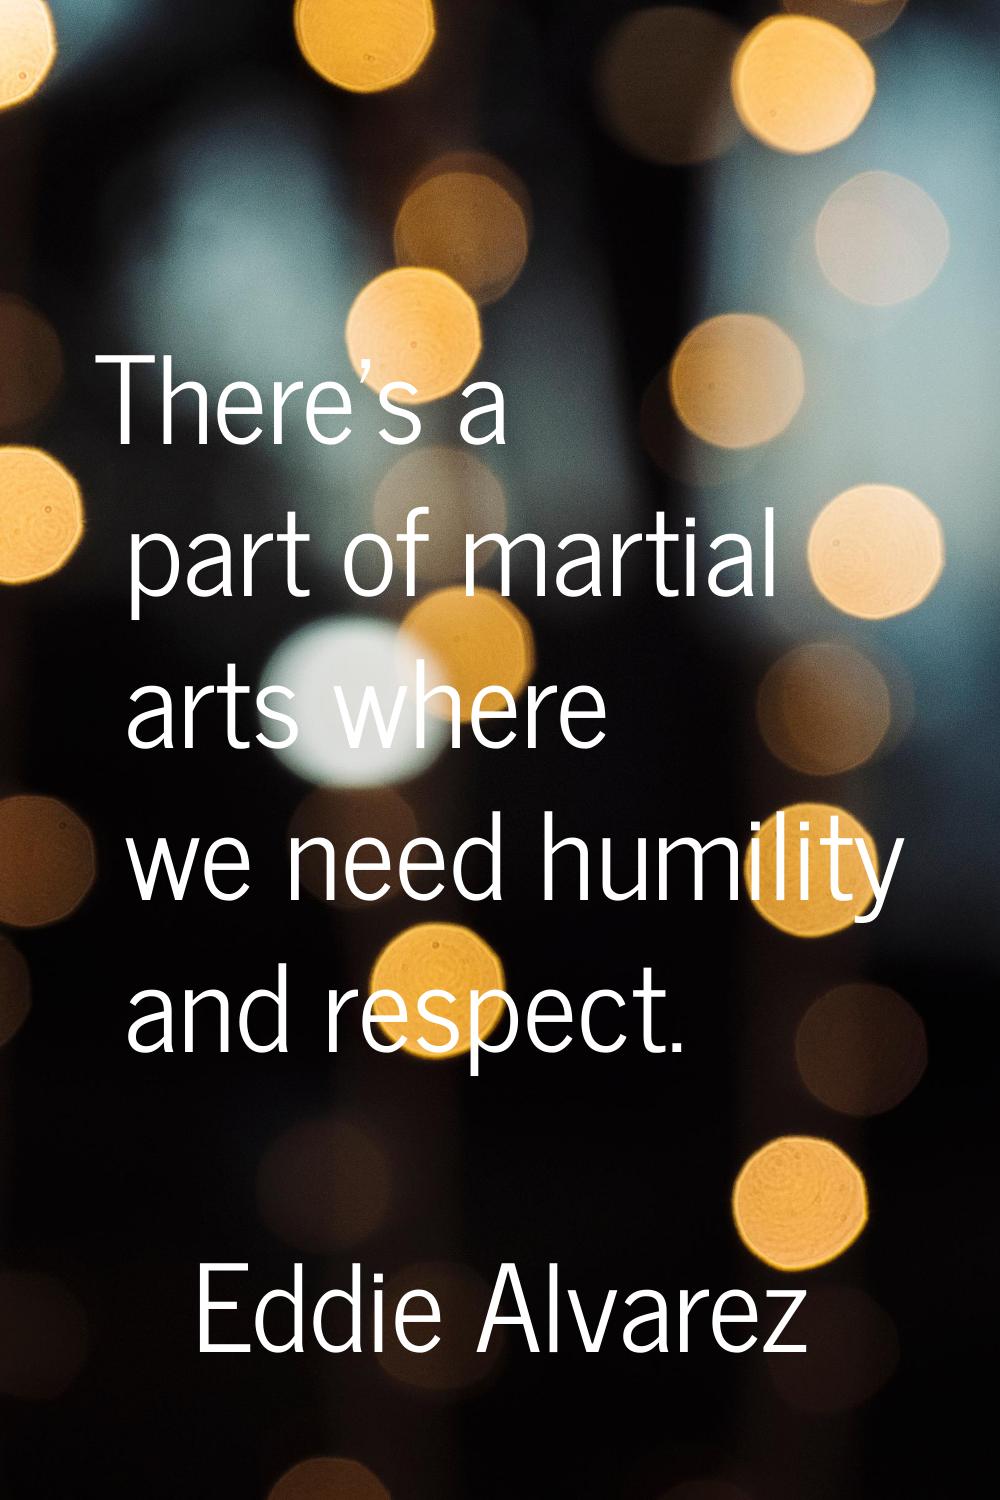 There's a part of martial arts where we need humility and respect.